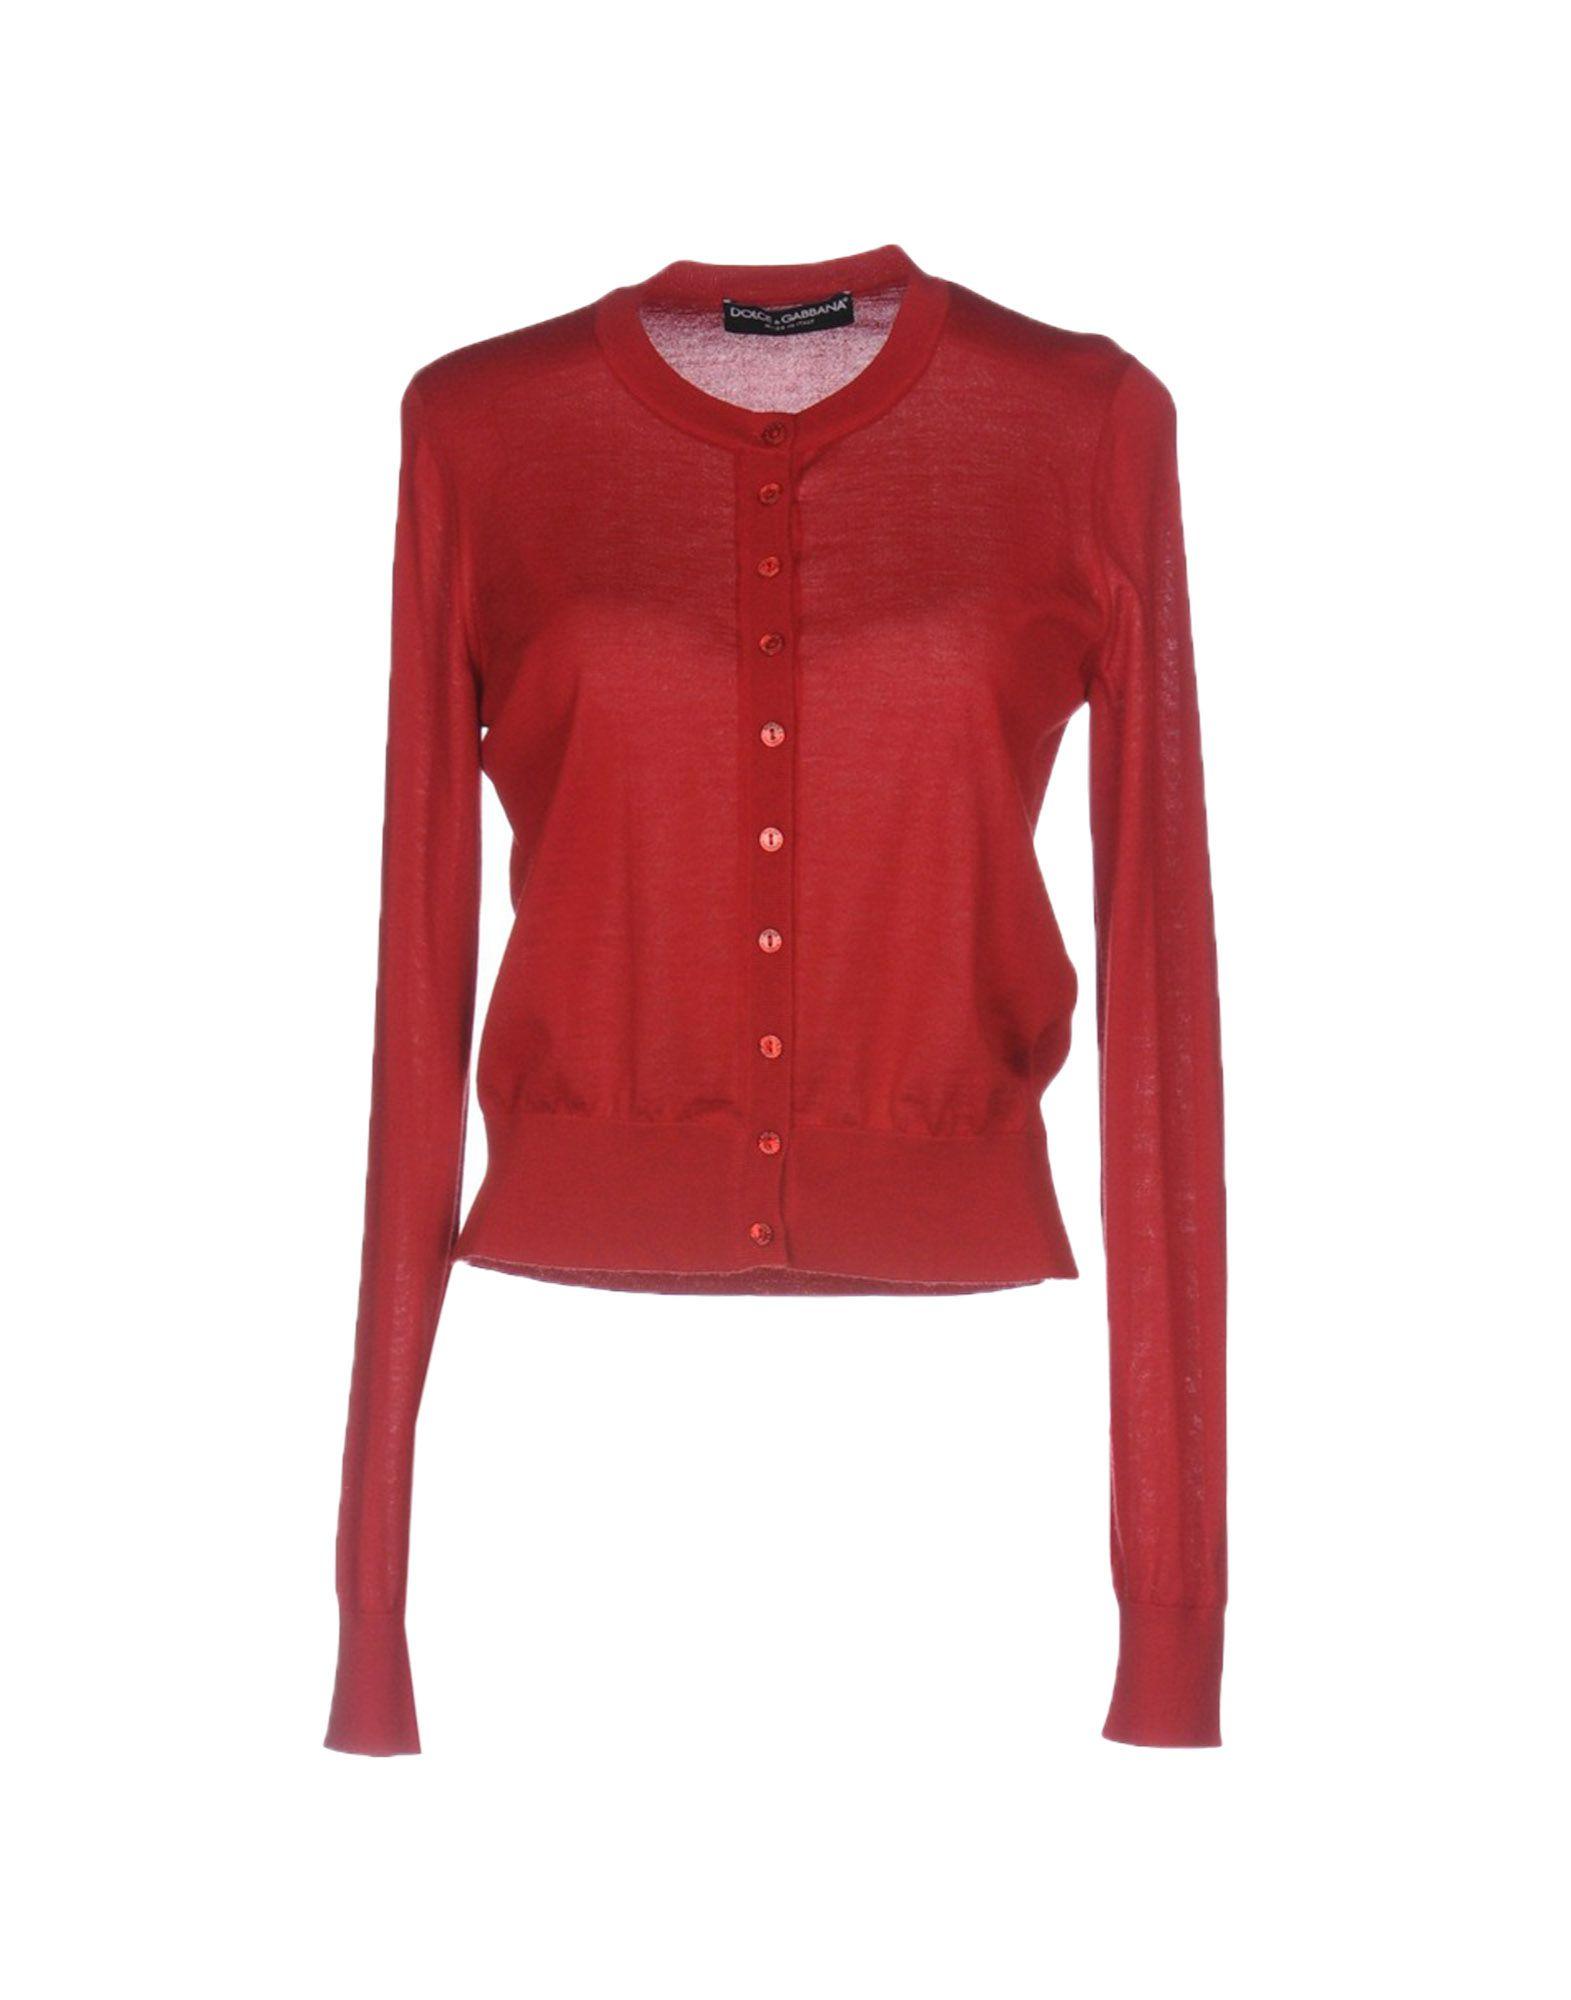 Dolce & Gabbana Cashmere Cardigan in Red - Lyst